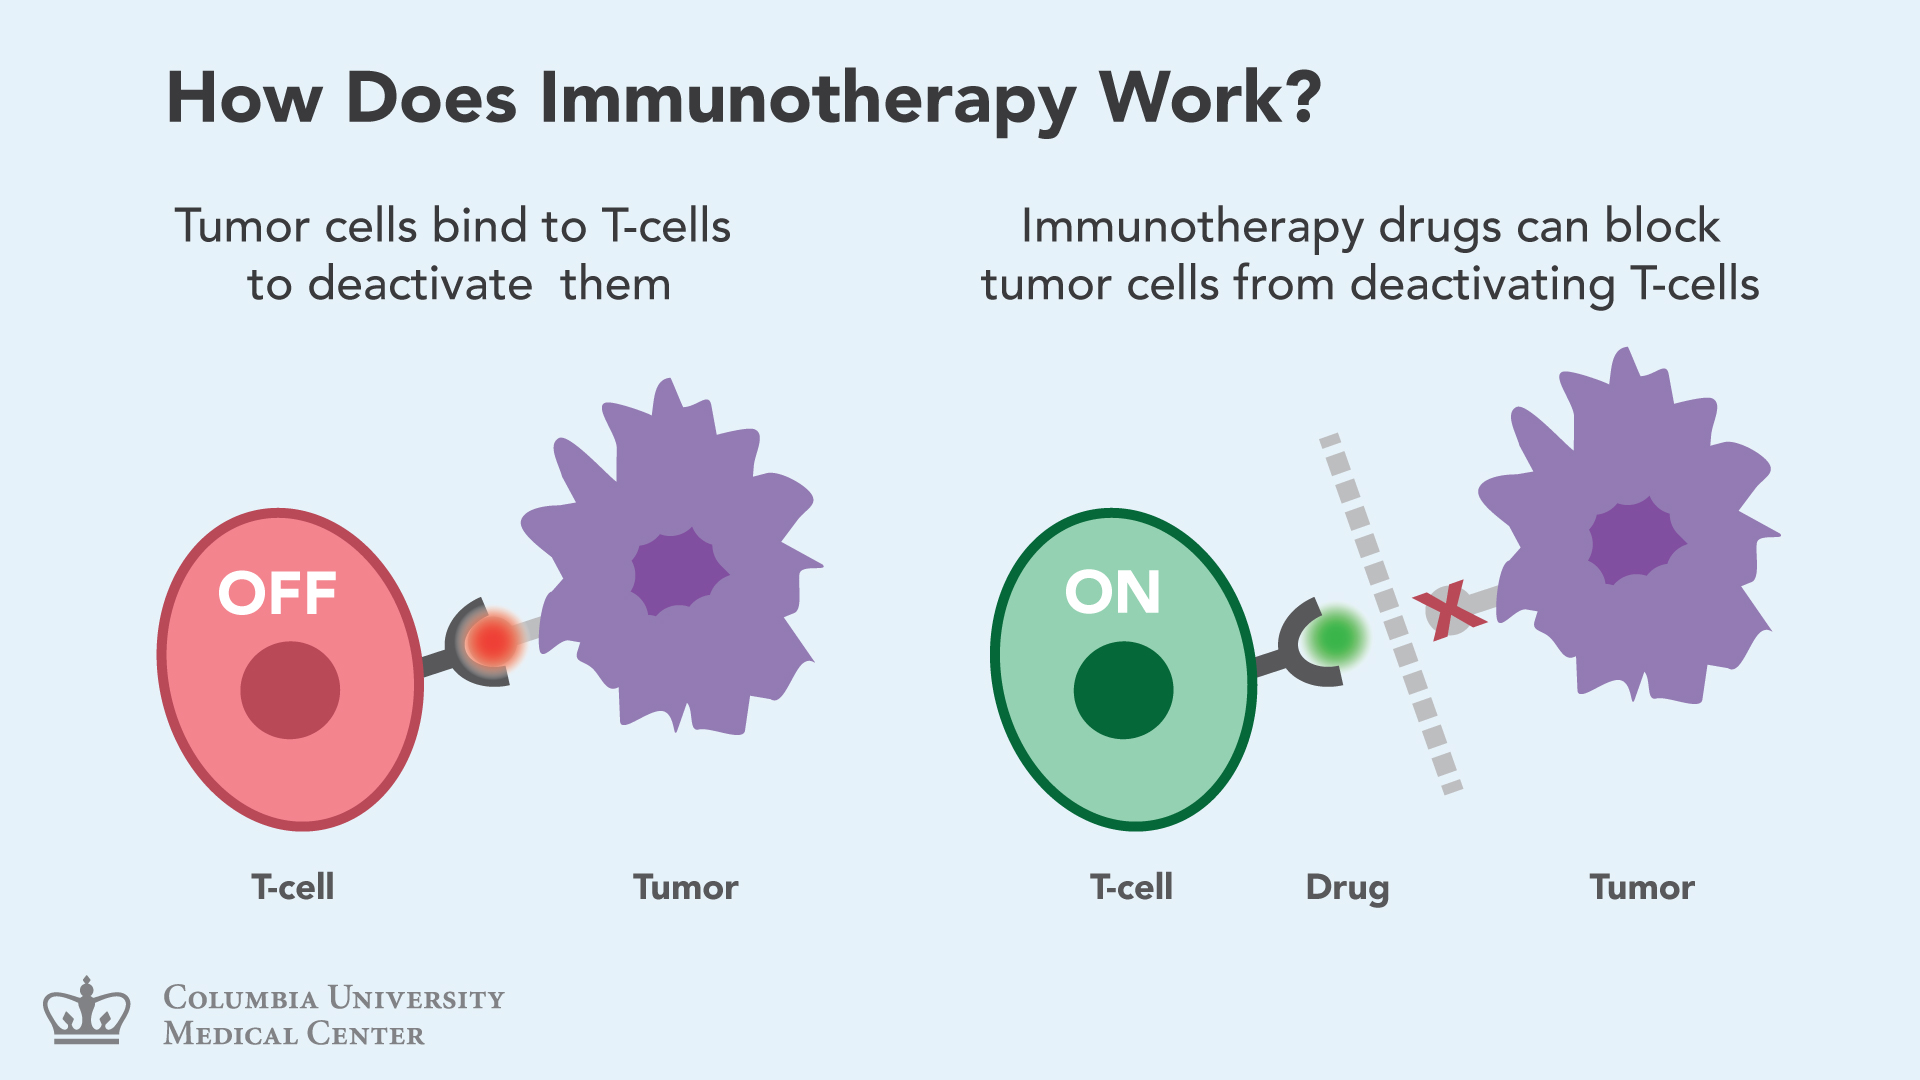 immunotherapy